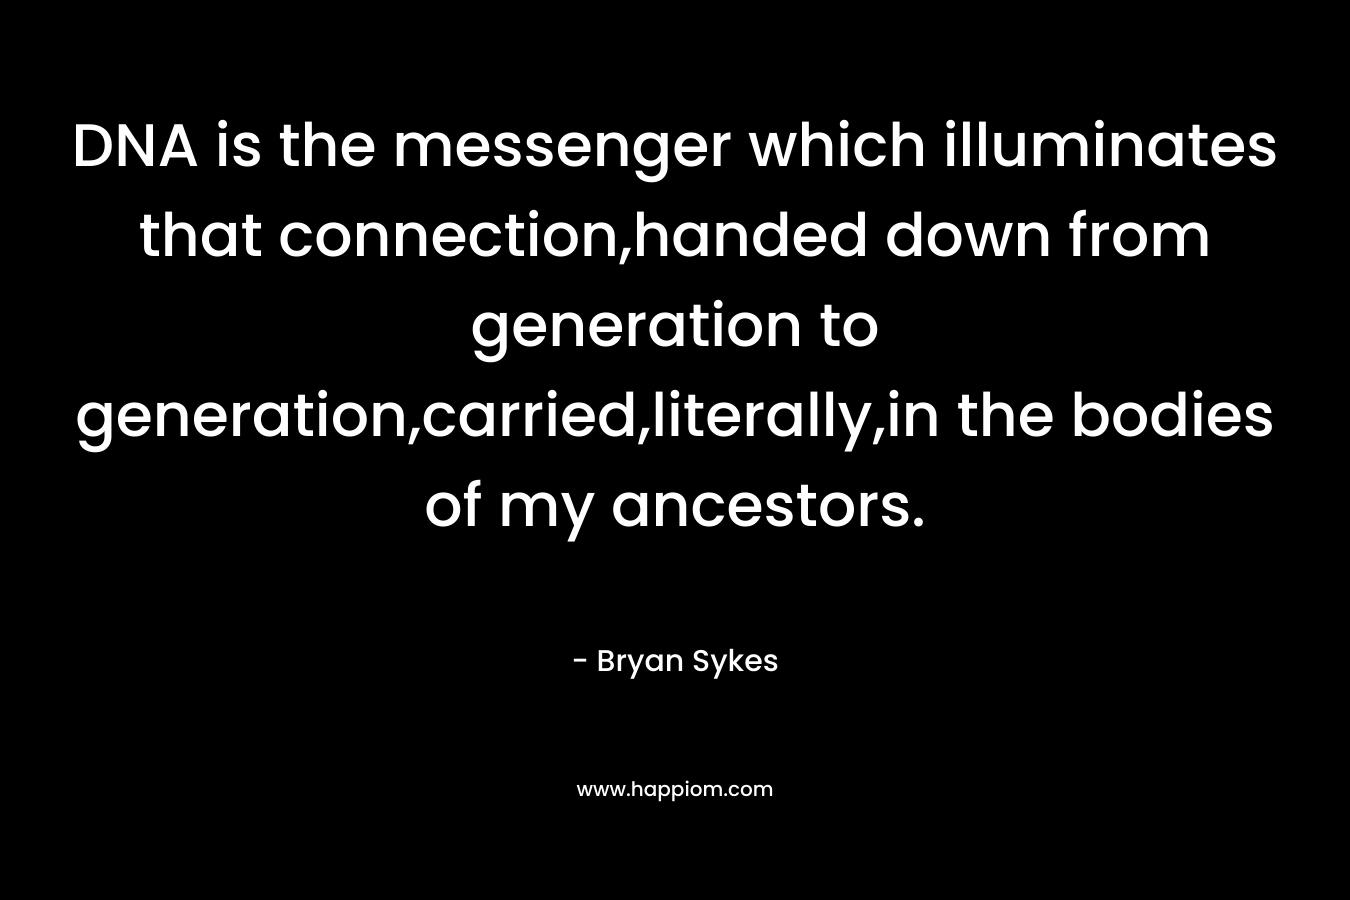 DNA is the messenger which illuminates that connection,handed down from generation to generation,carried,literally,in the bodies of my ancestors. – Bryan Sykes